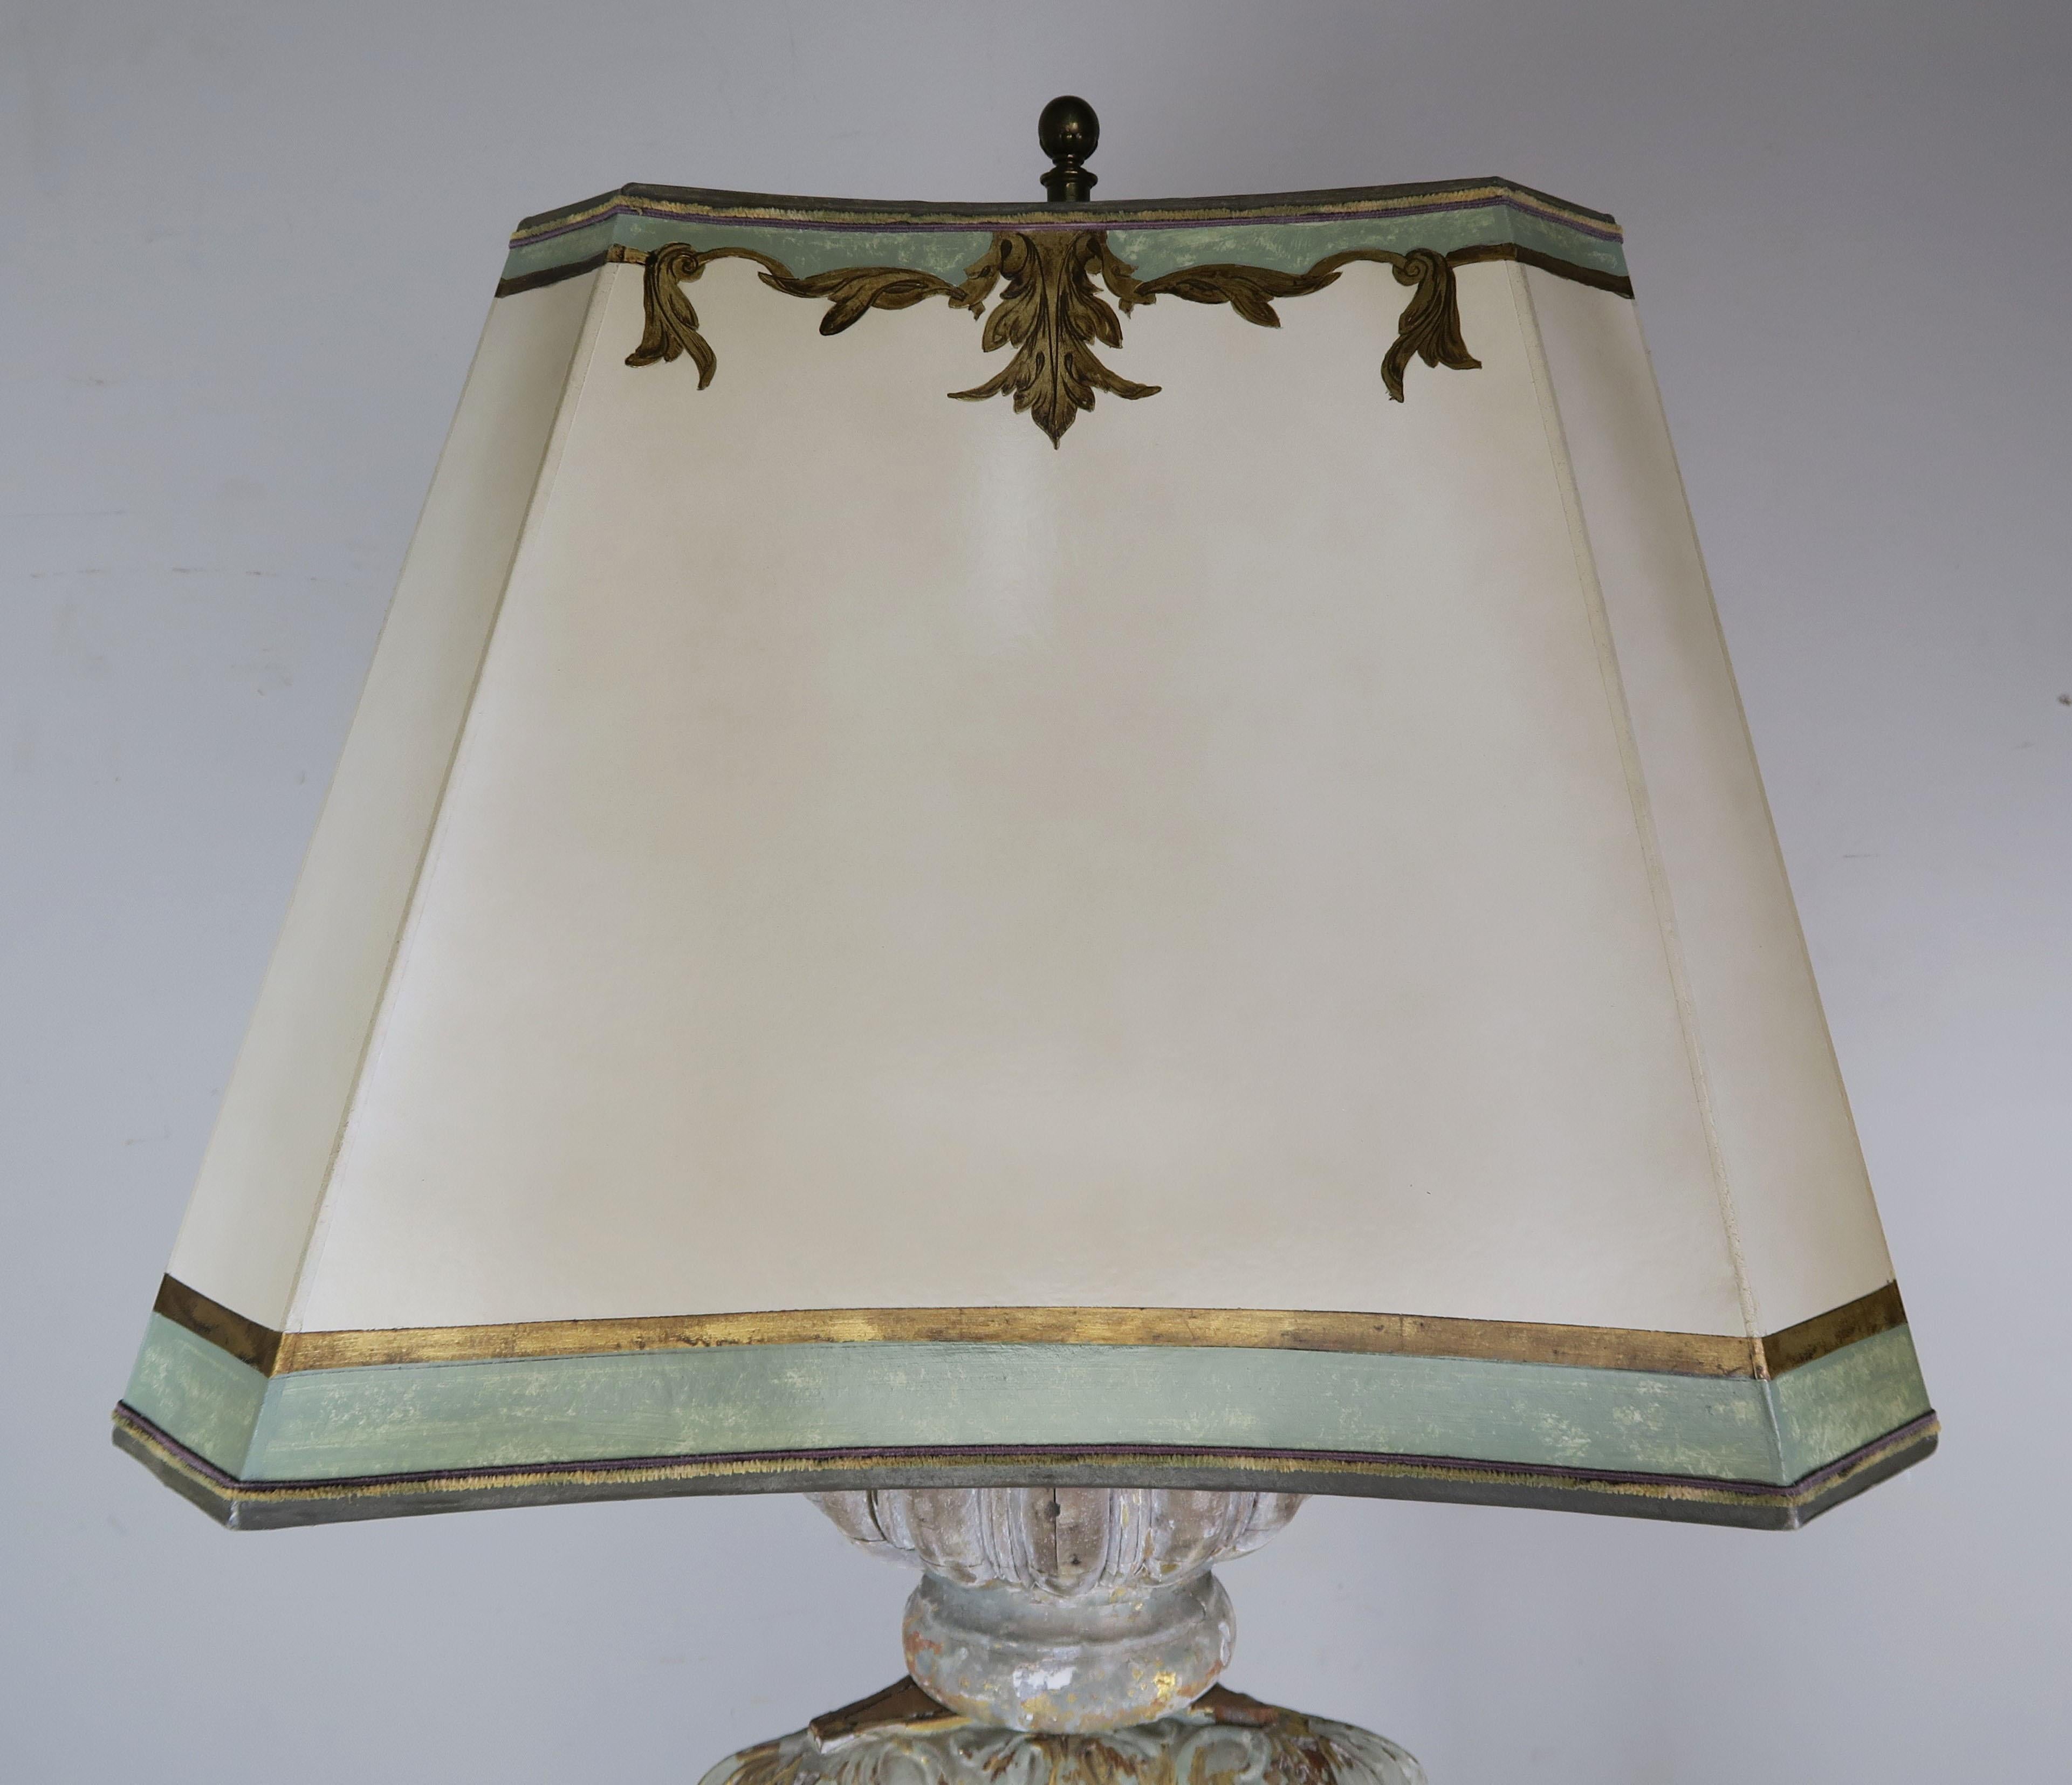 19th century Italian painted torchiere that has been wired into a standing lamp and crowned with a hand painted square shaped parchment shade with tapered corners. The torchiere Stand on a scrolled tripod base and has intricate carved details that